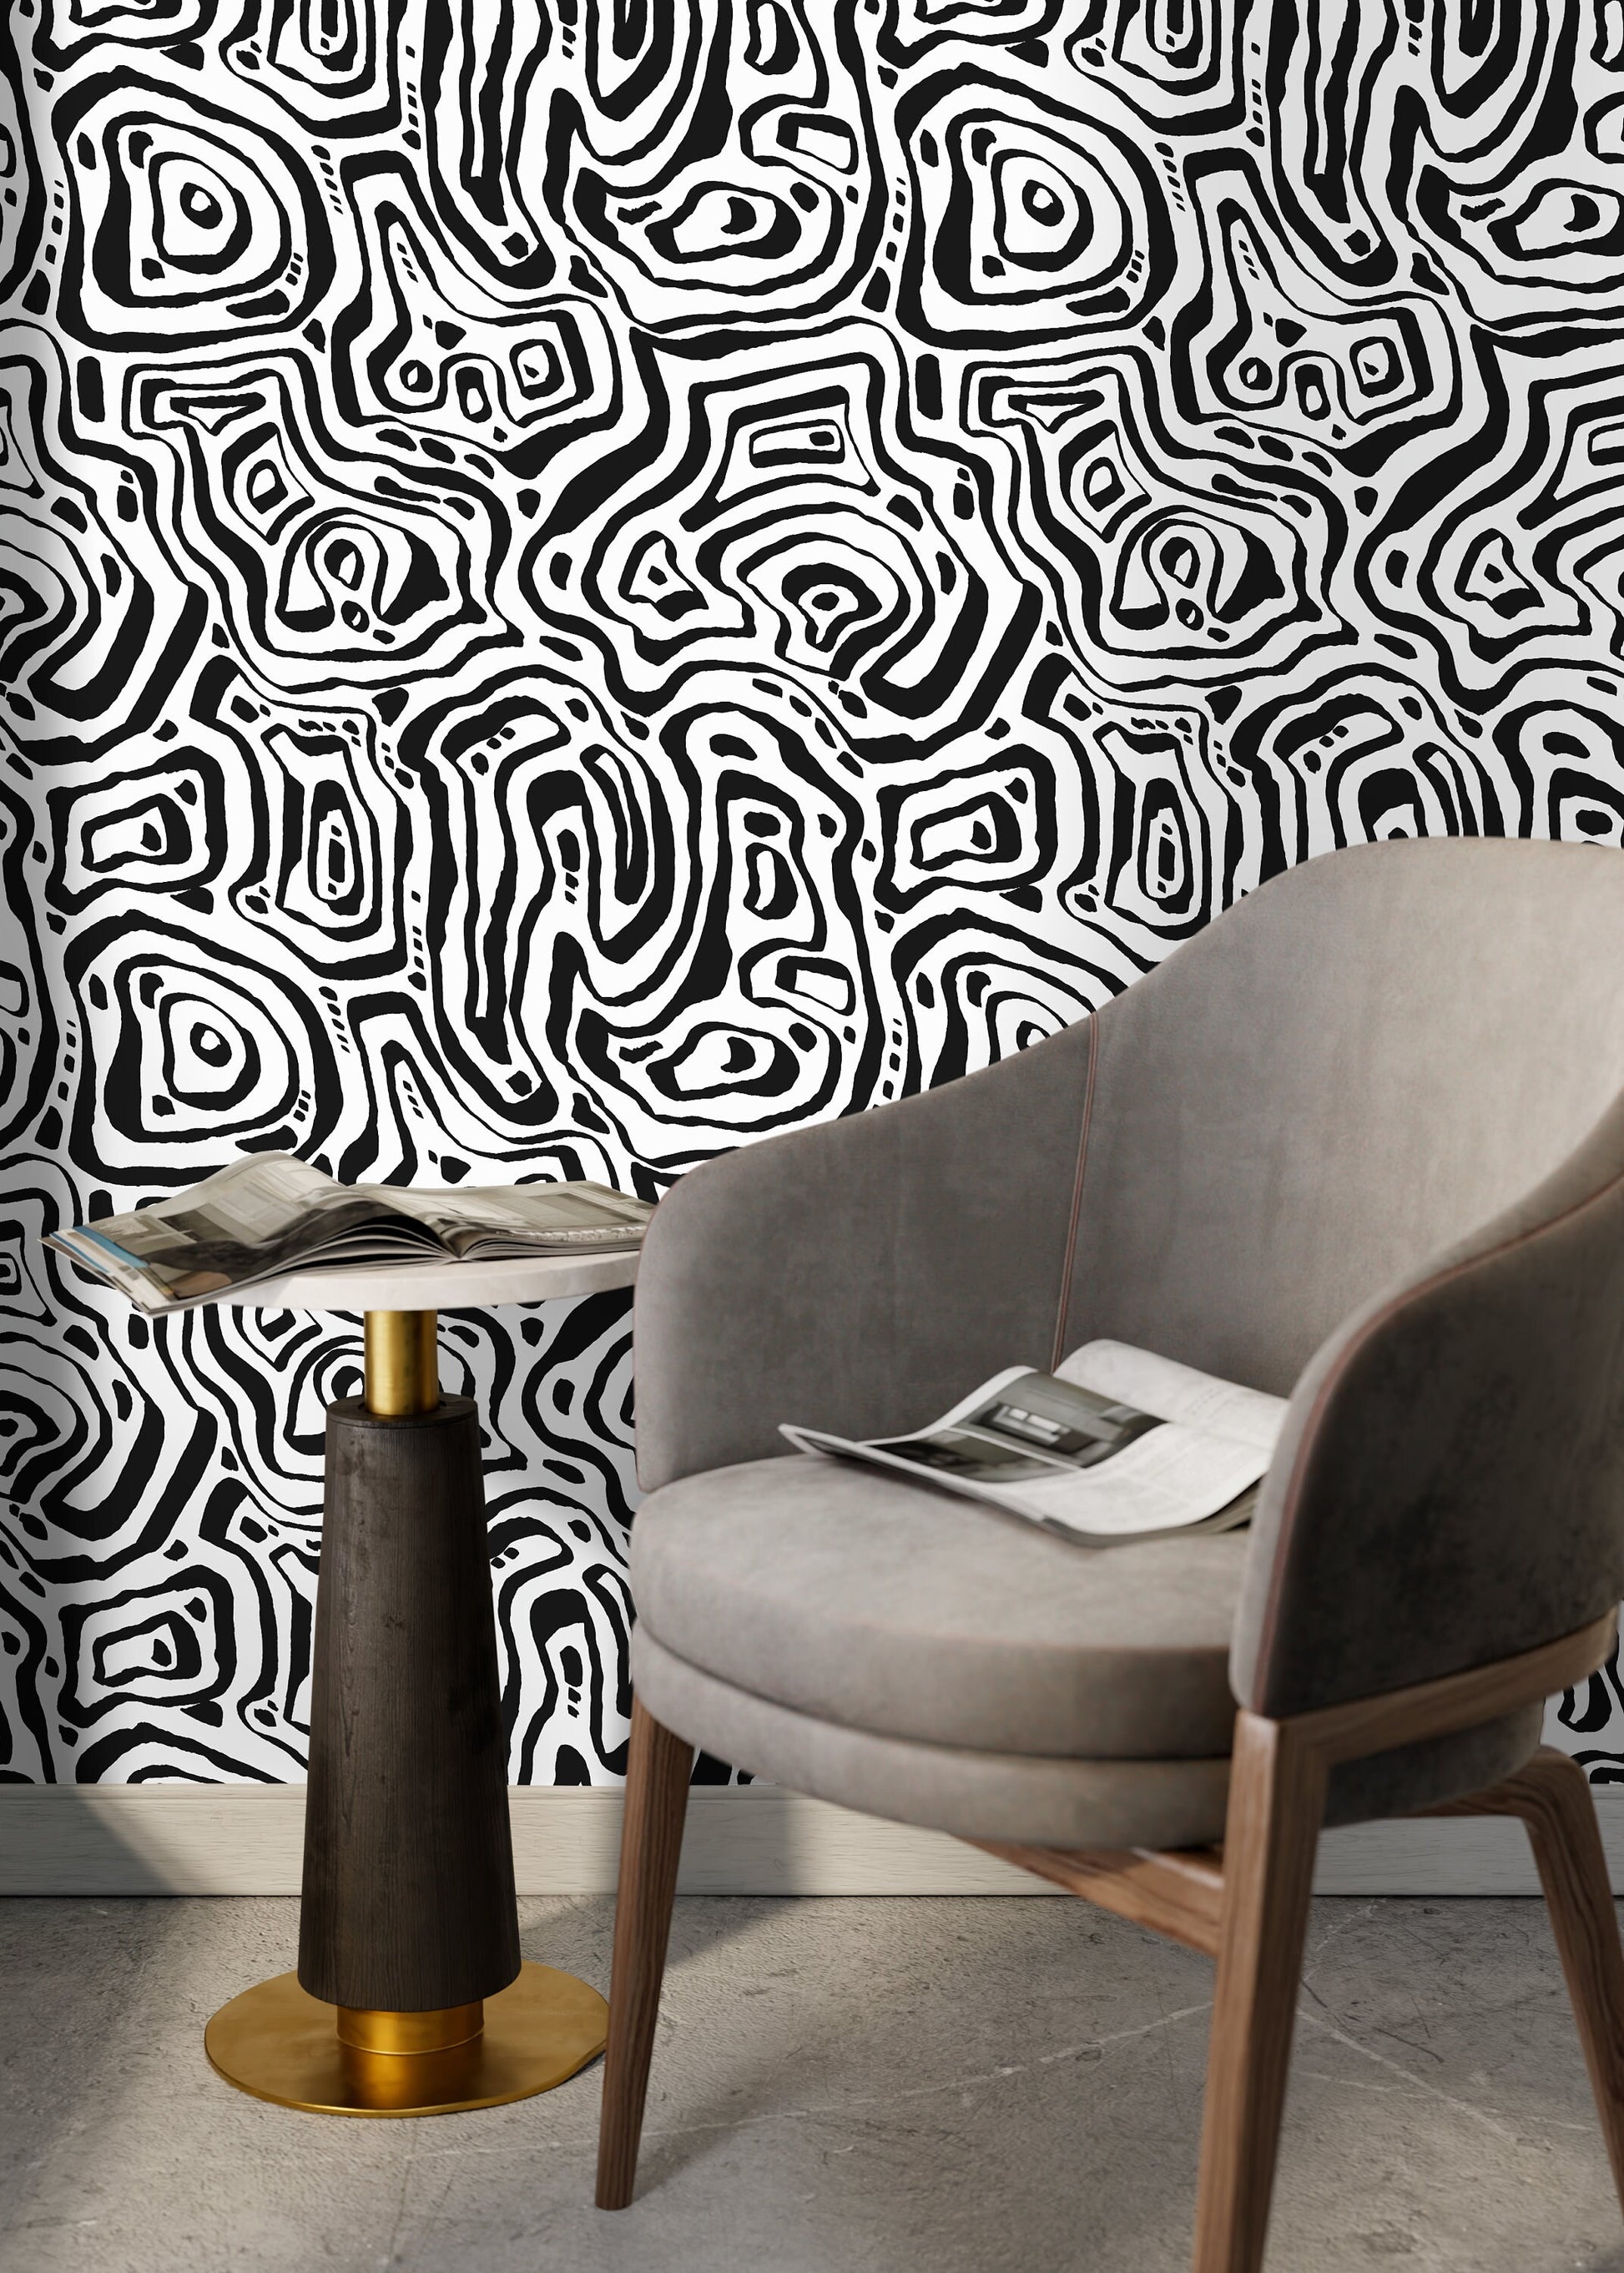 Black and White Abstract Lines Wallpaper / Peel and Stick Wallpaper Removable Wallpaper Home Decor Wall Art Wall Decor Room Decor - C656